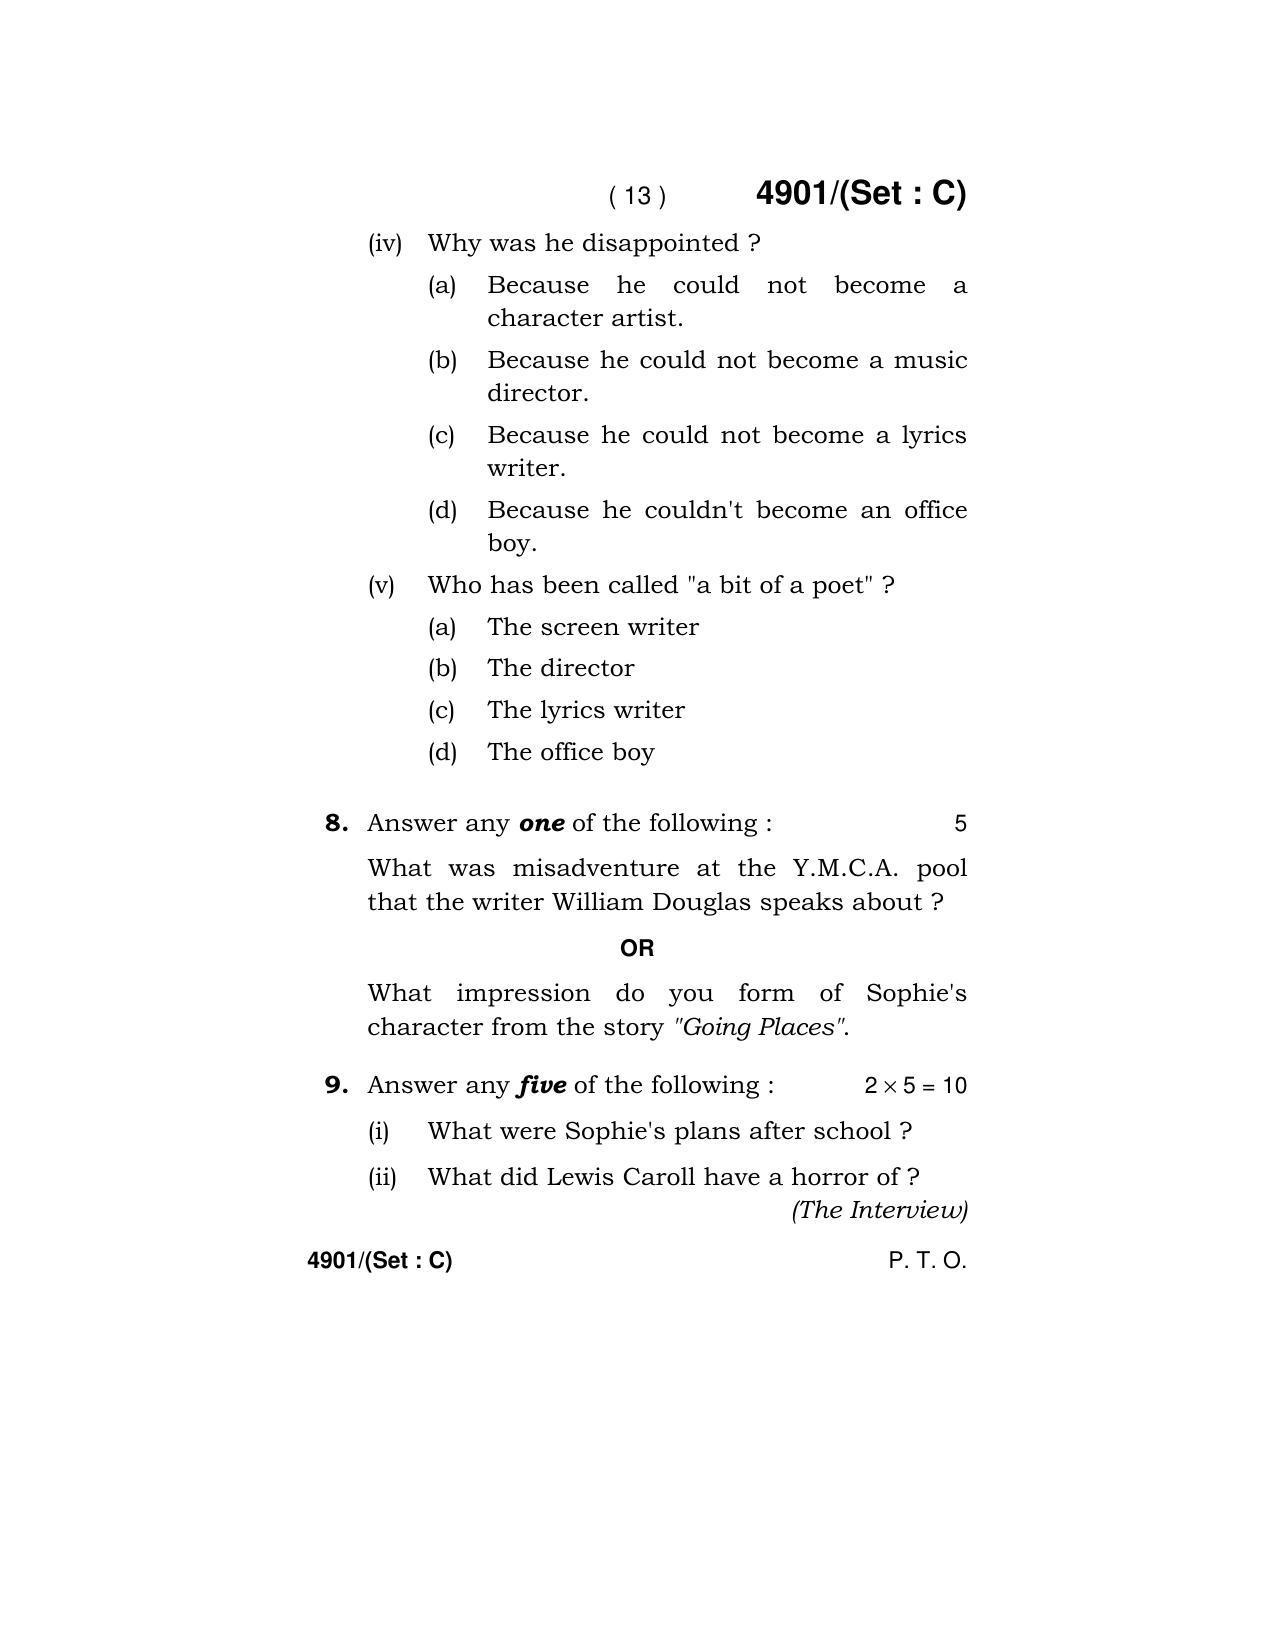 Haryana Board HBSE Class 12 English Core 2020 Question Paper - Page 45